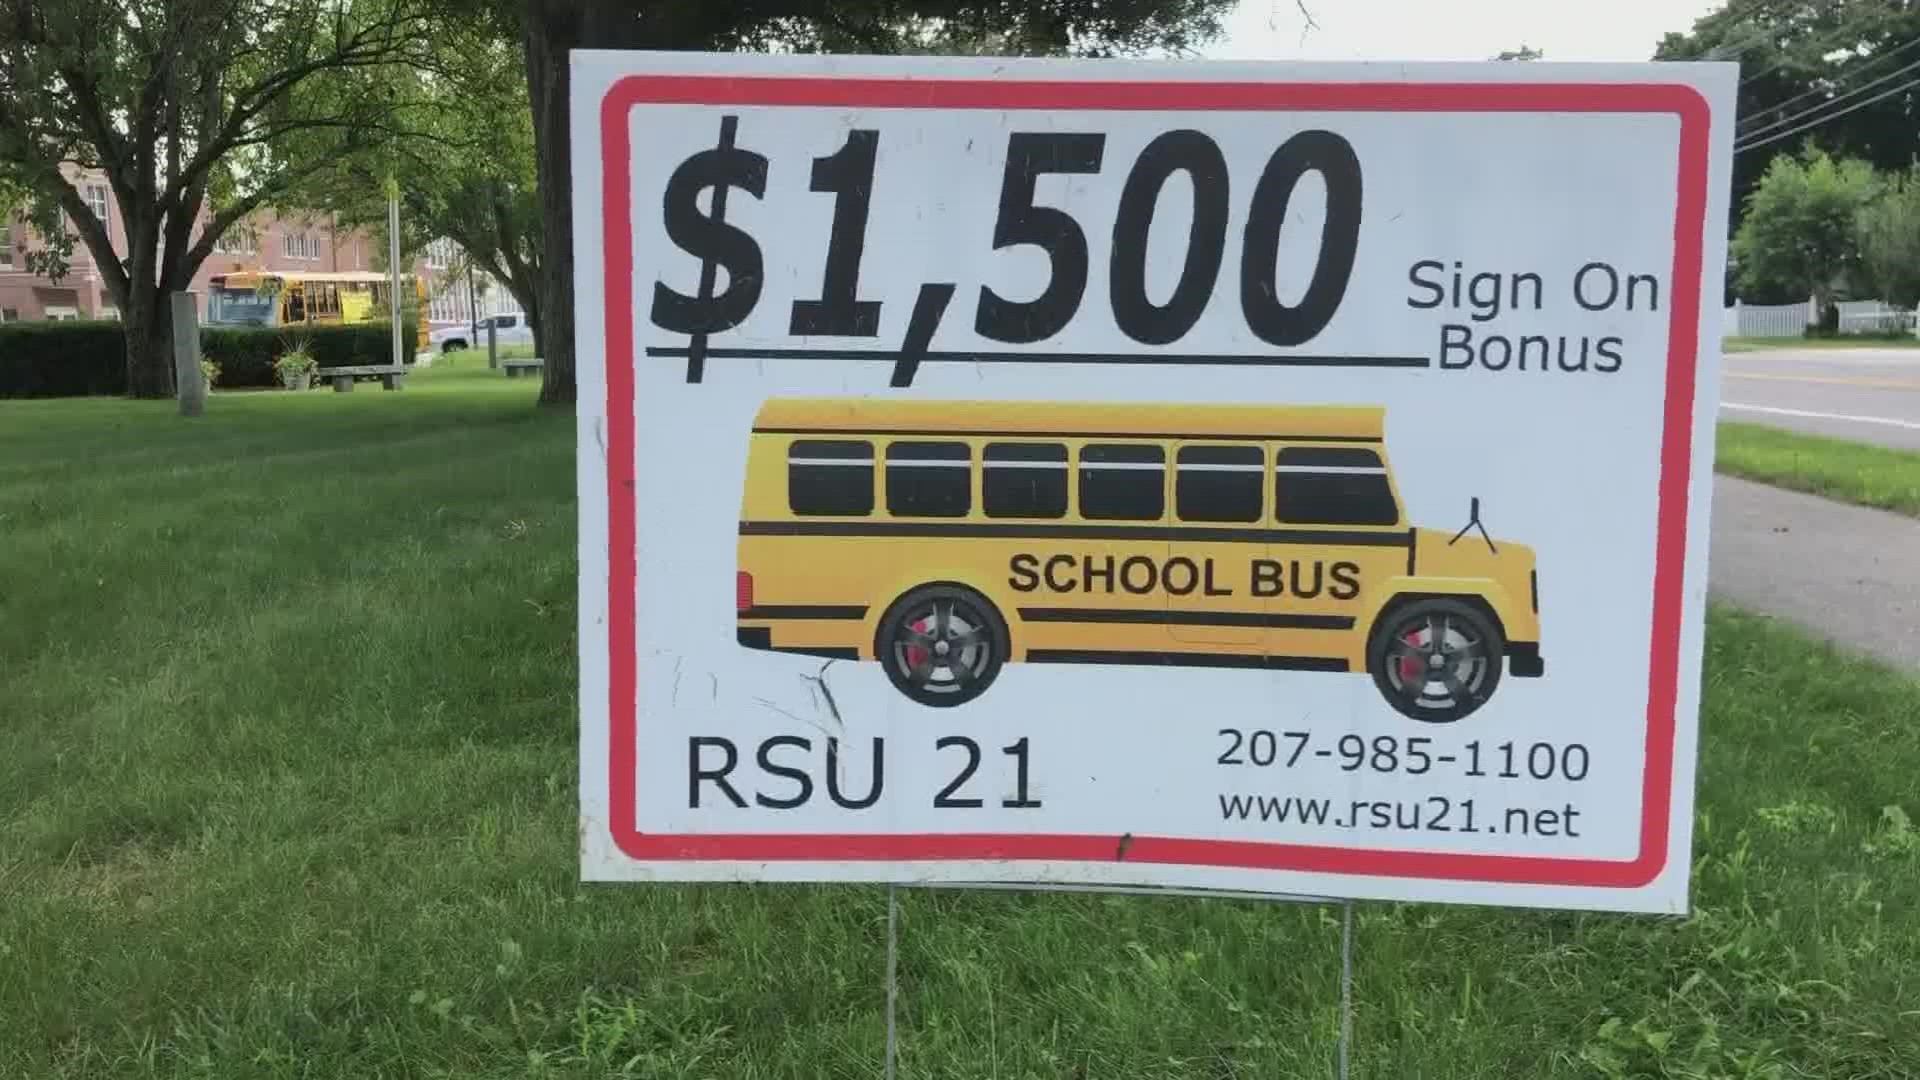 RSU 21 and 22 are offering hundreds of dollars in bonuses to get open positions filled before the start of school.